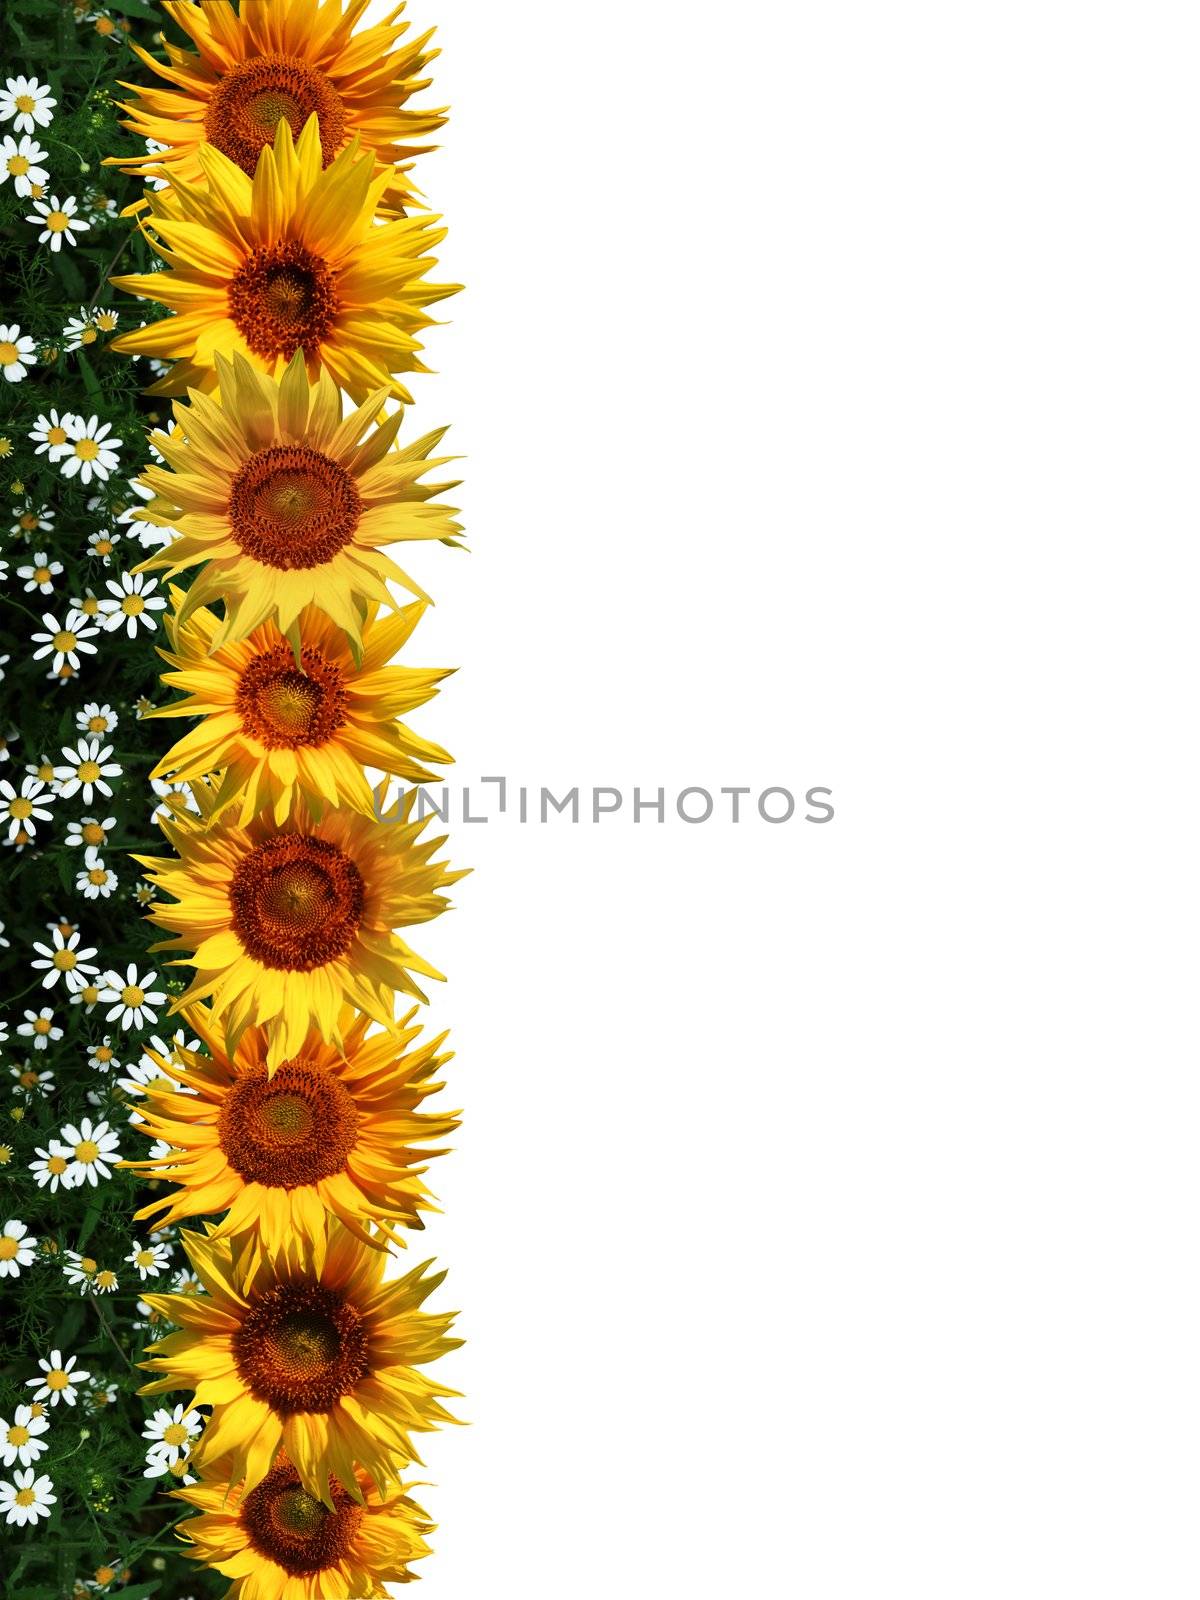 An image of sunflowers in a line.